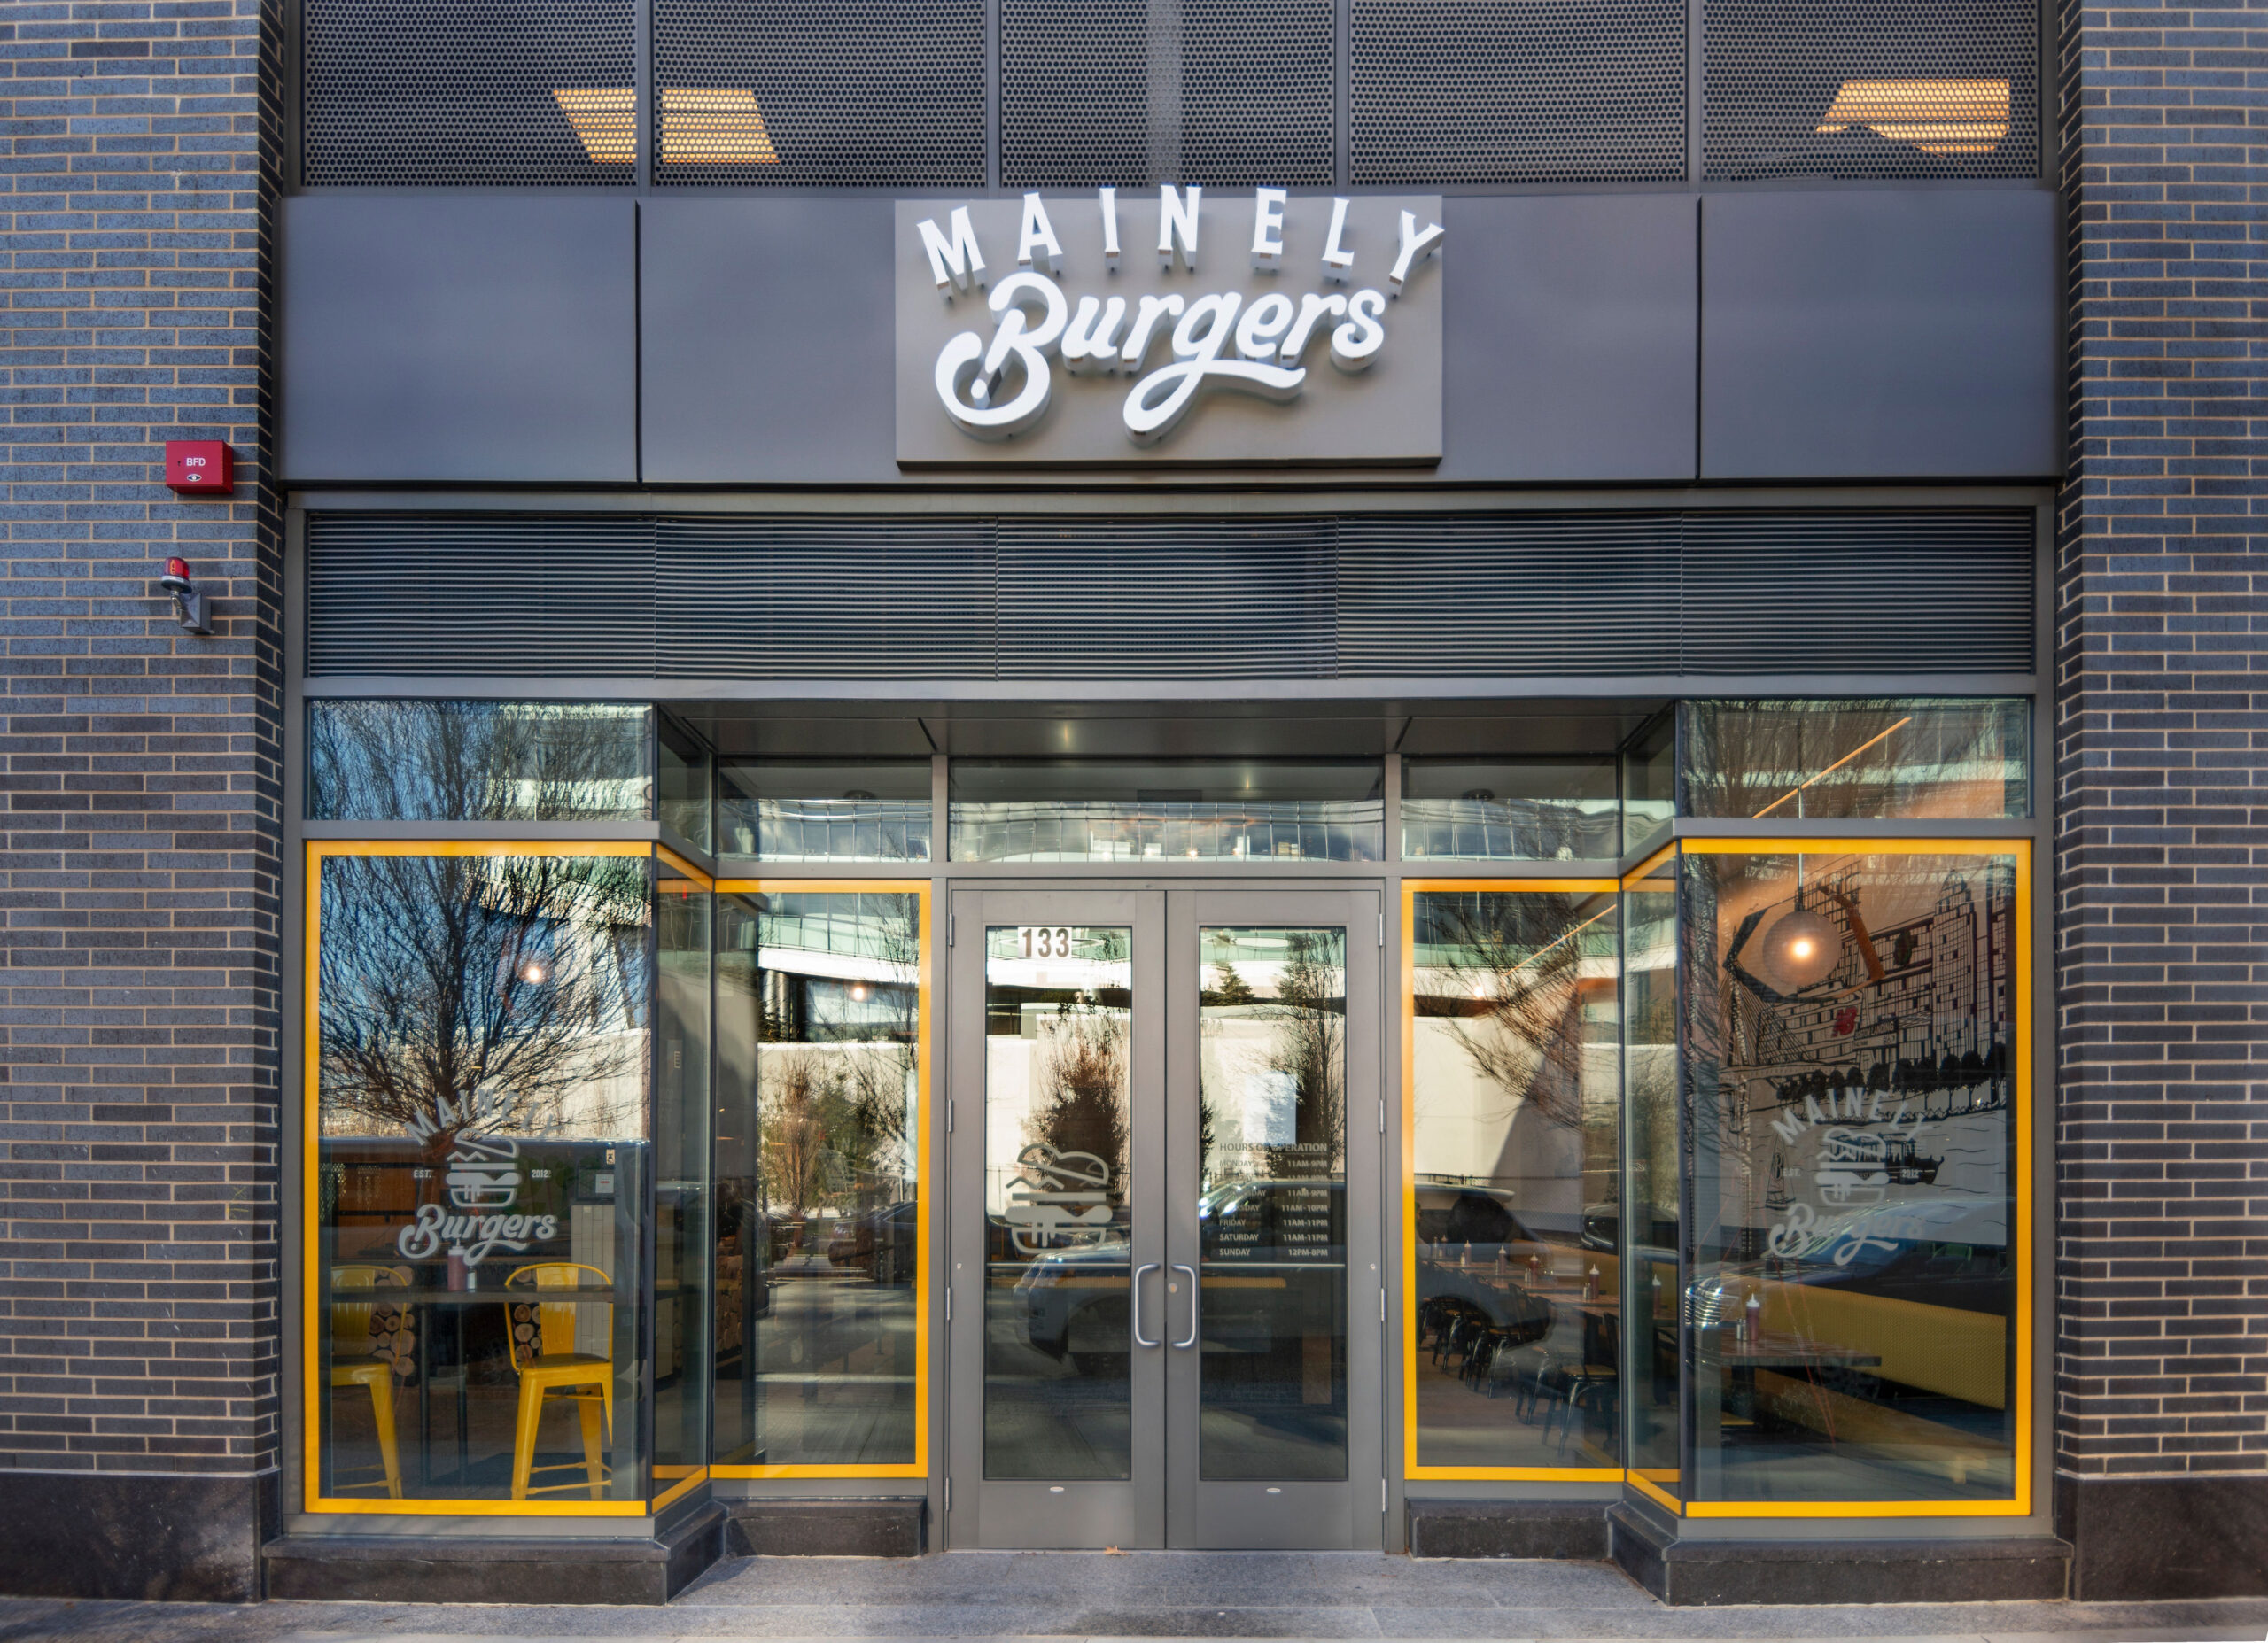 Fast Casual Exterior building design with brand logo, yellow detailing on doors, wood facade